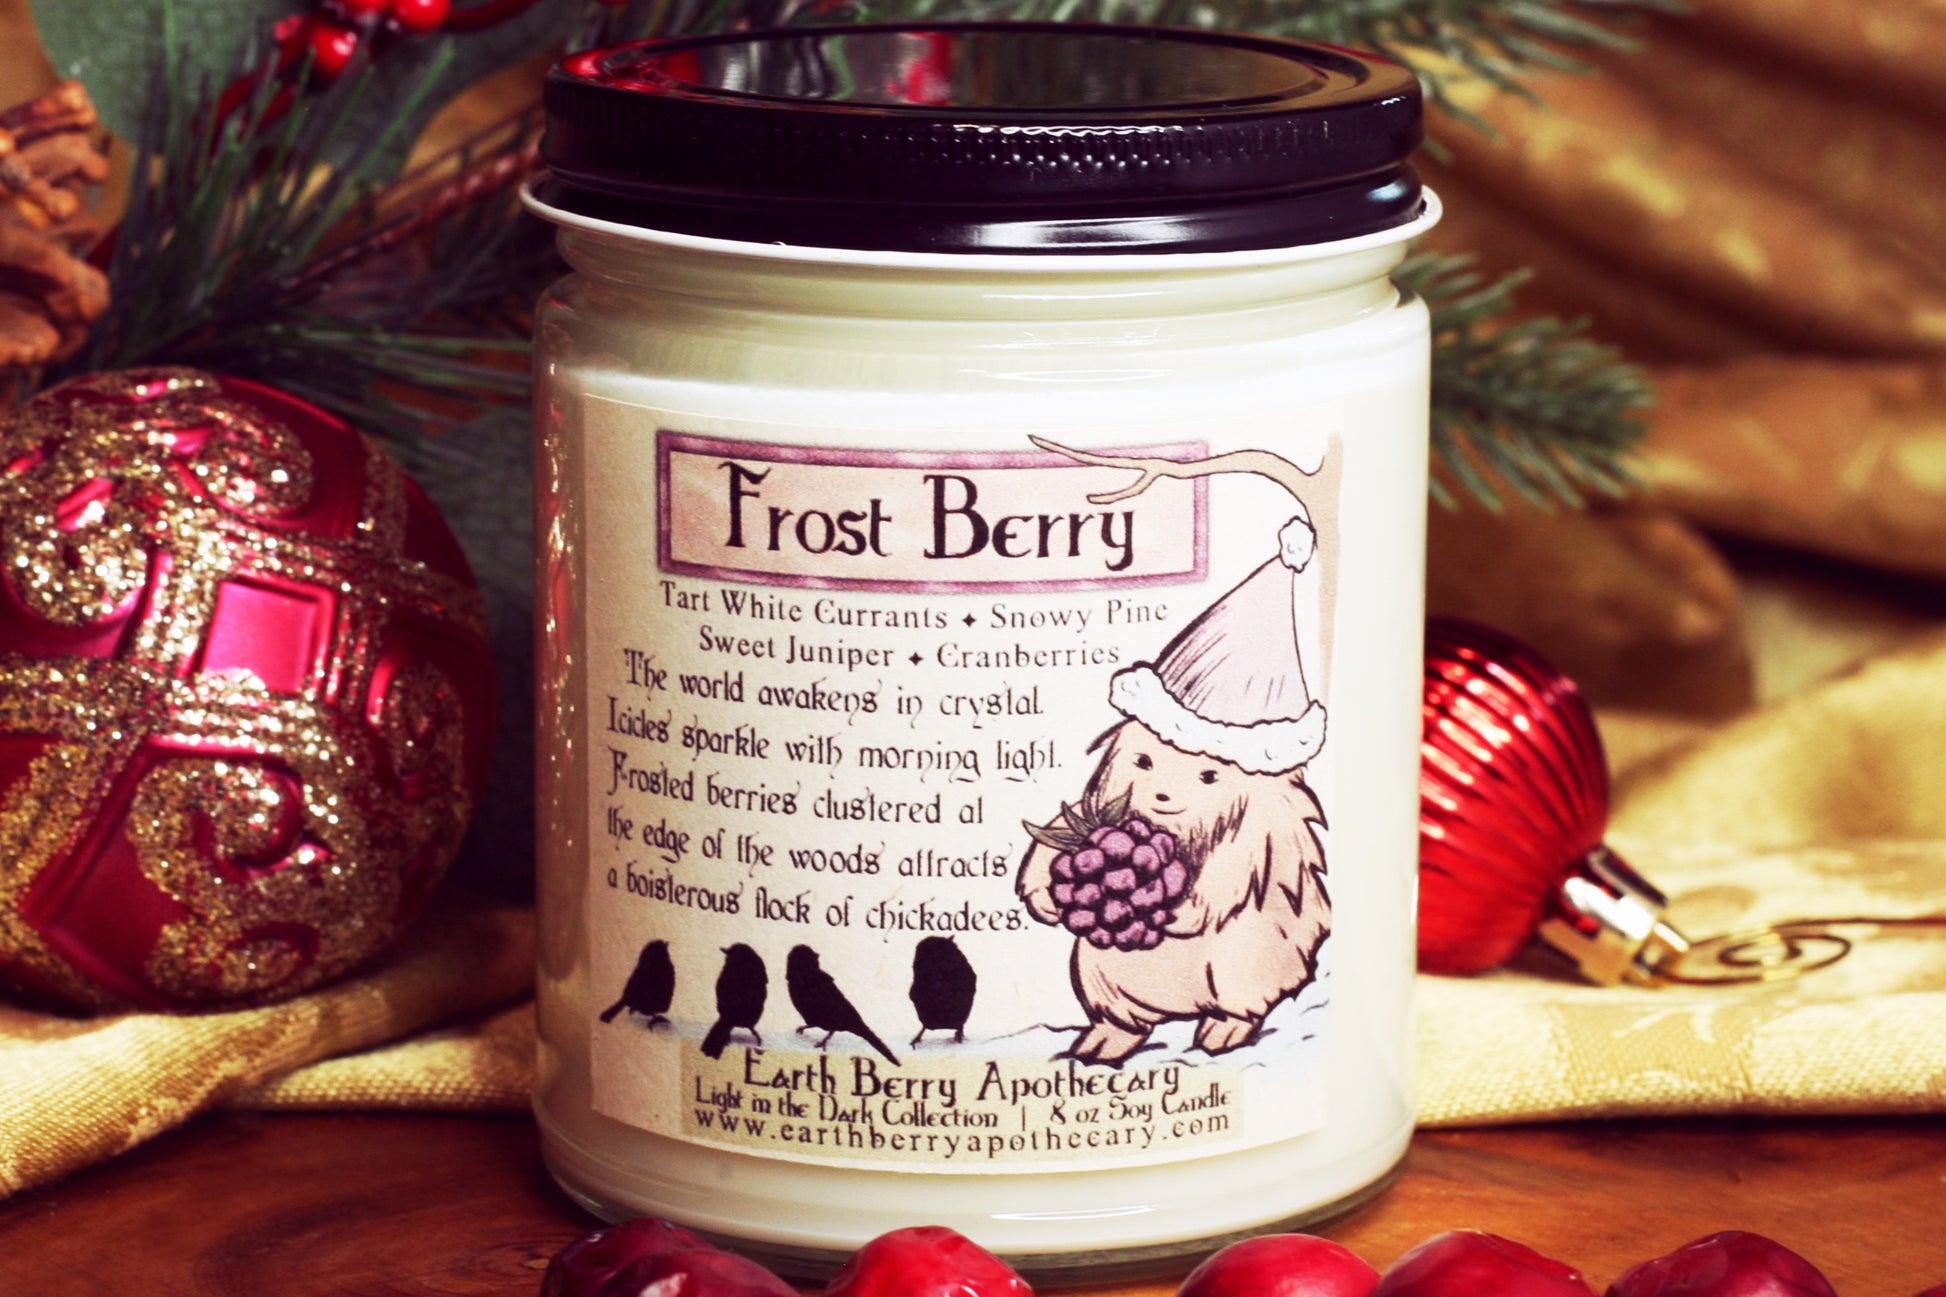 Frost berry fantasy soy candle scented with cranberries, currants, and pine. Always clean burning and nontoxic